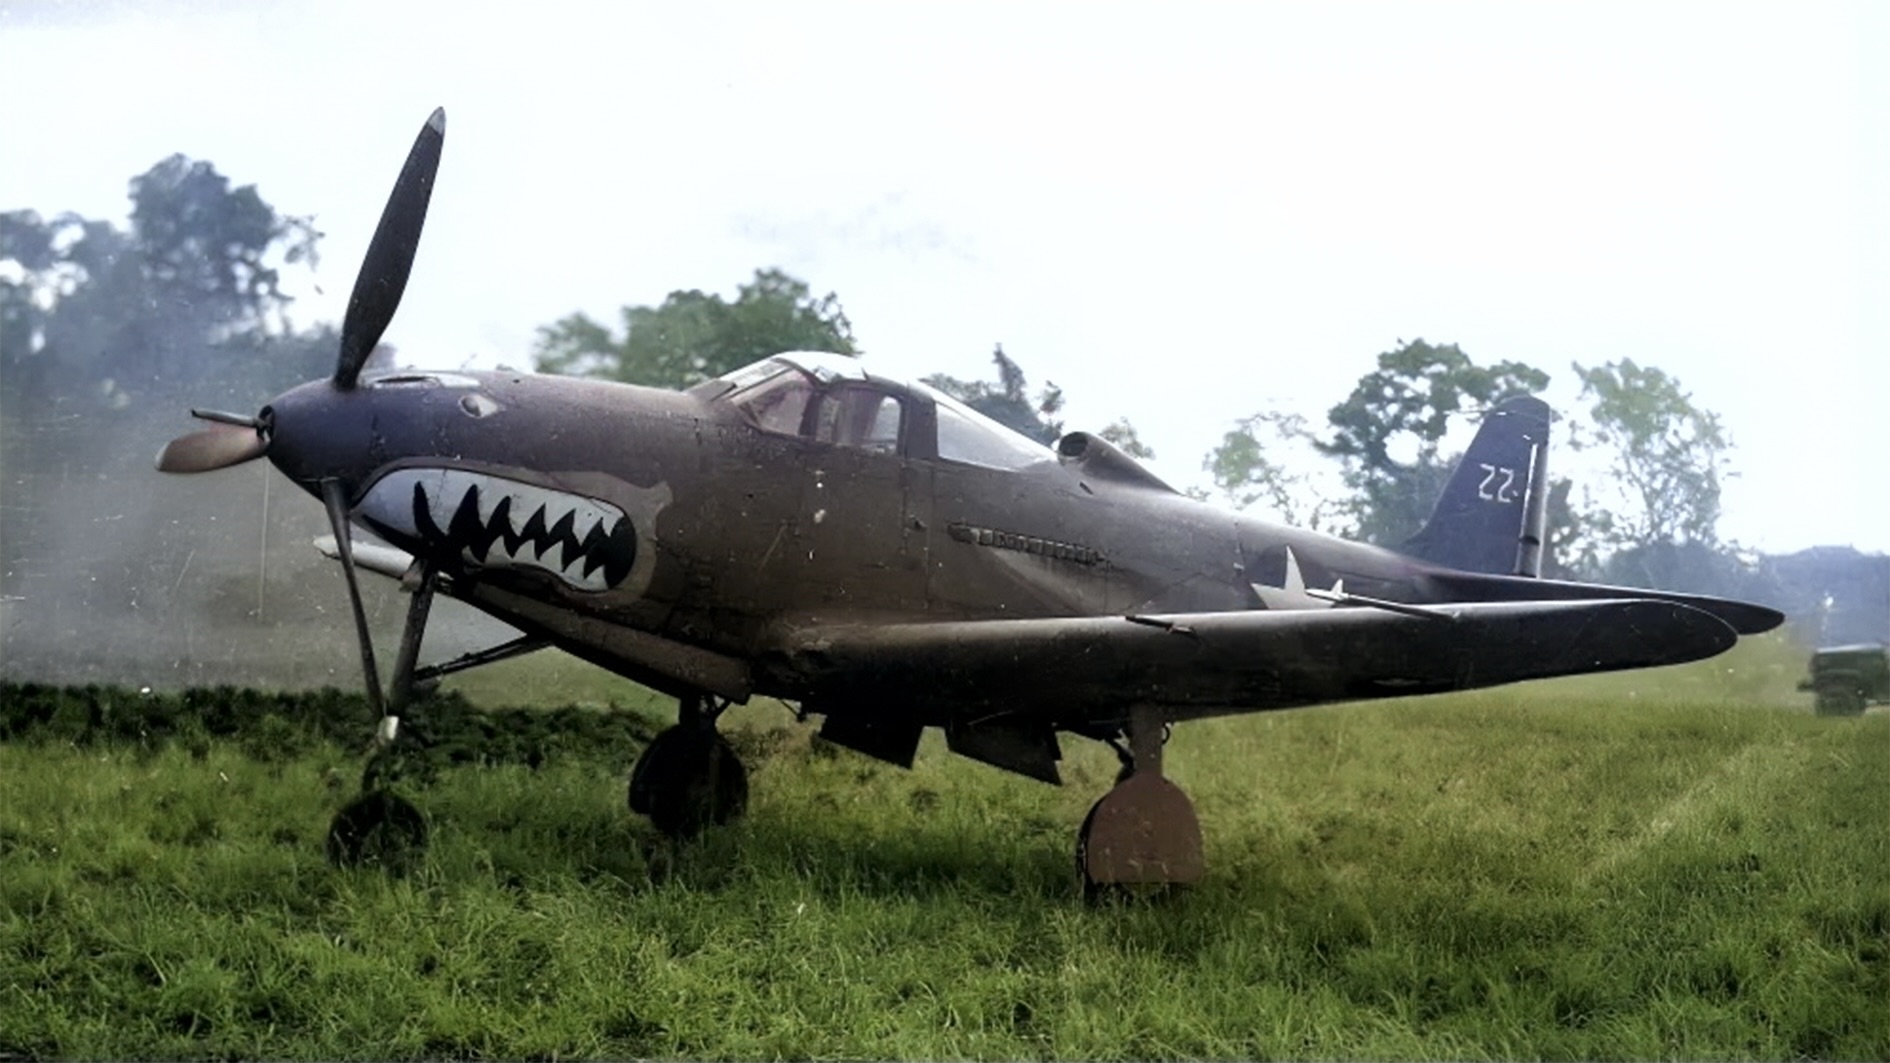 A Bell P-39 Airacobra just off the runway at Henderson Field, Guadalcanal. Despite the fierce look of the warpaint, the P-39’s performance was unimpressive. U.S. Marine Corps photo